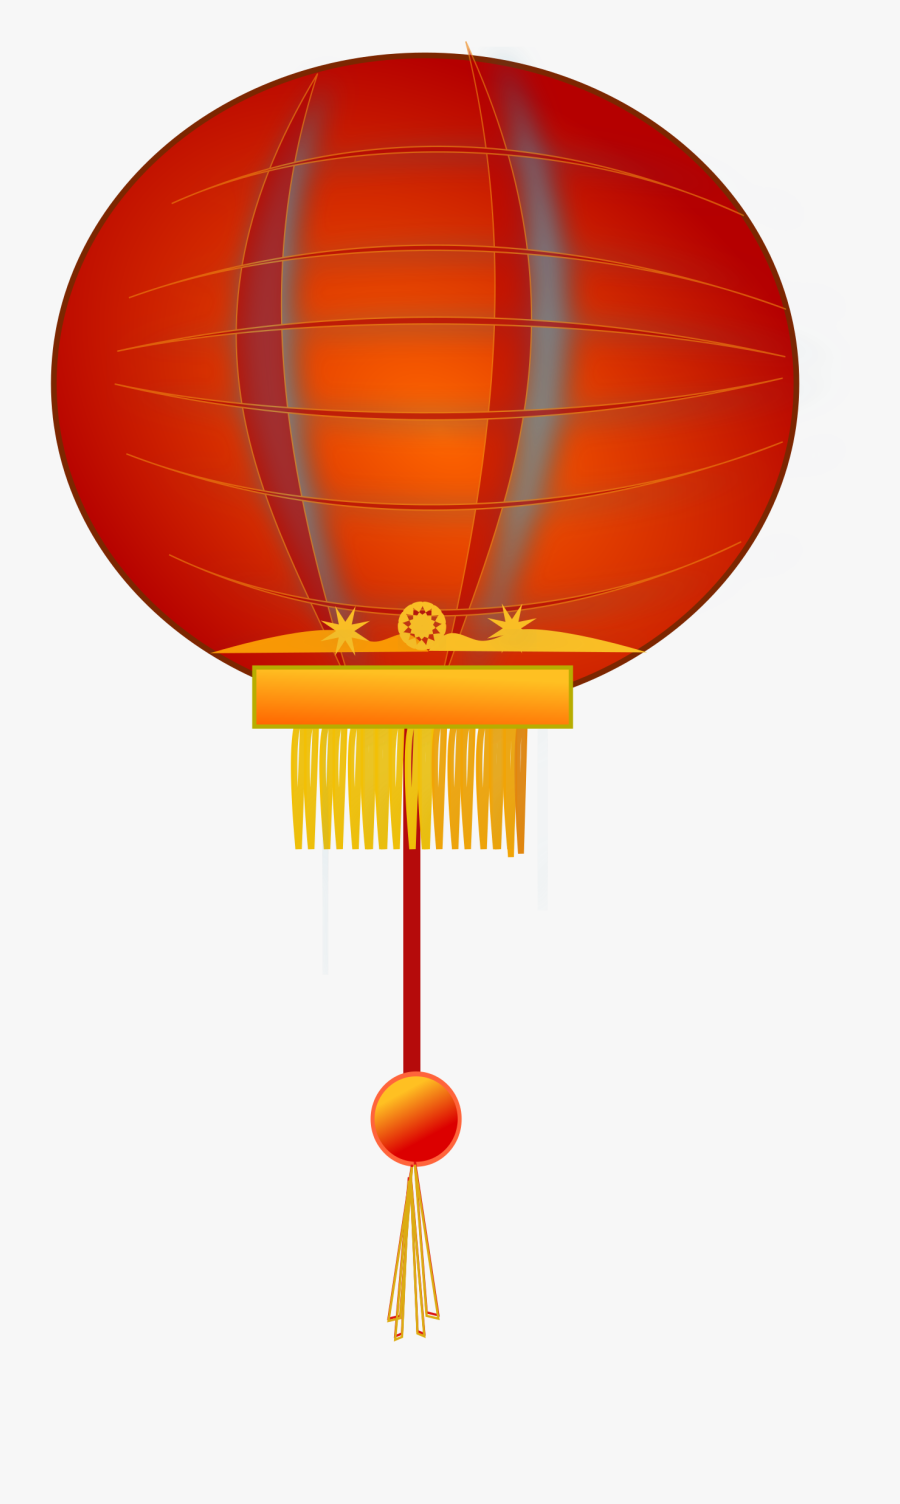 Chinese New Year Lantern Clip Art Clipart - Chinese Lantern Transparent Background, Transparent Clipart